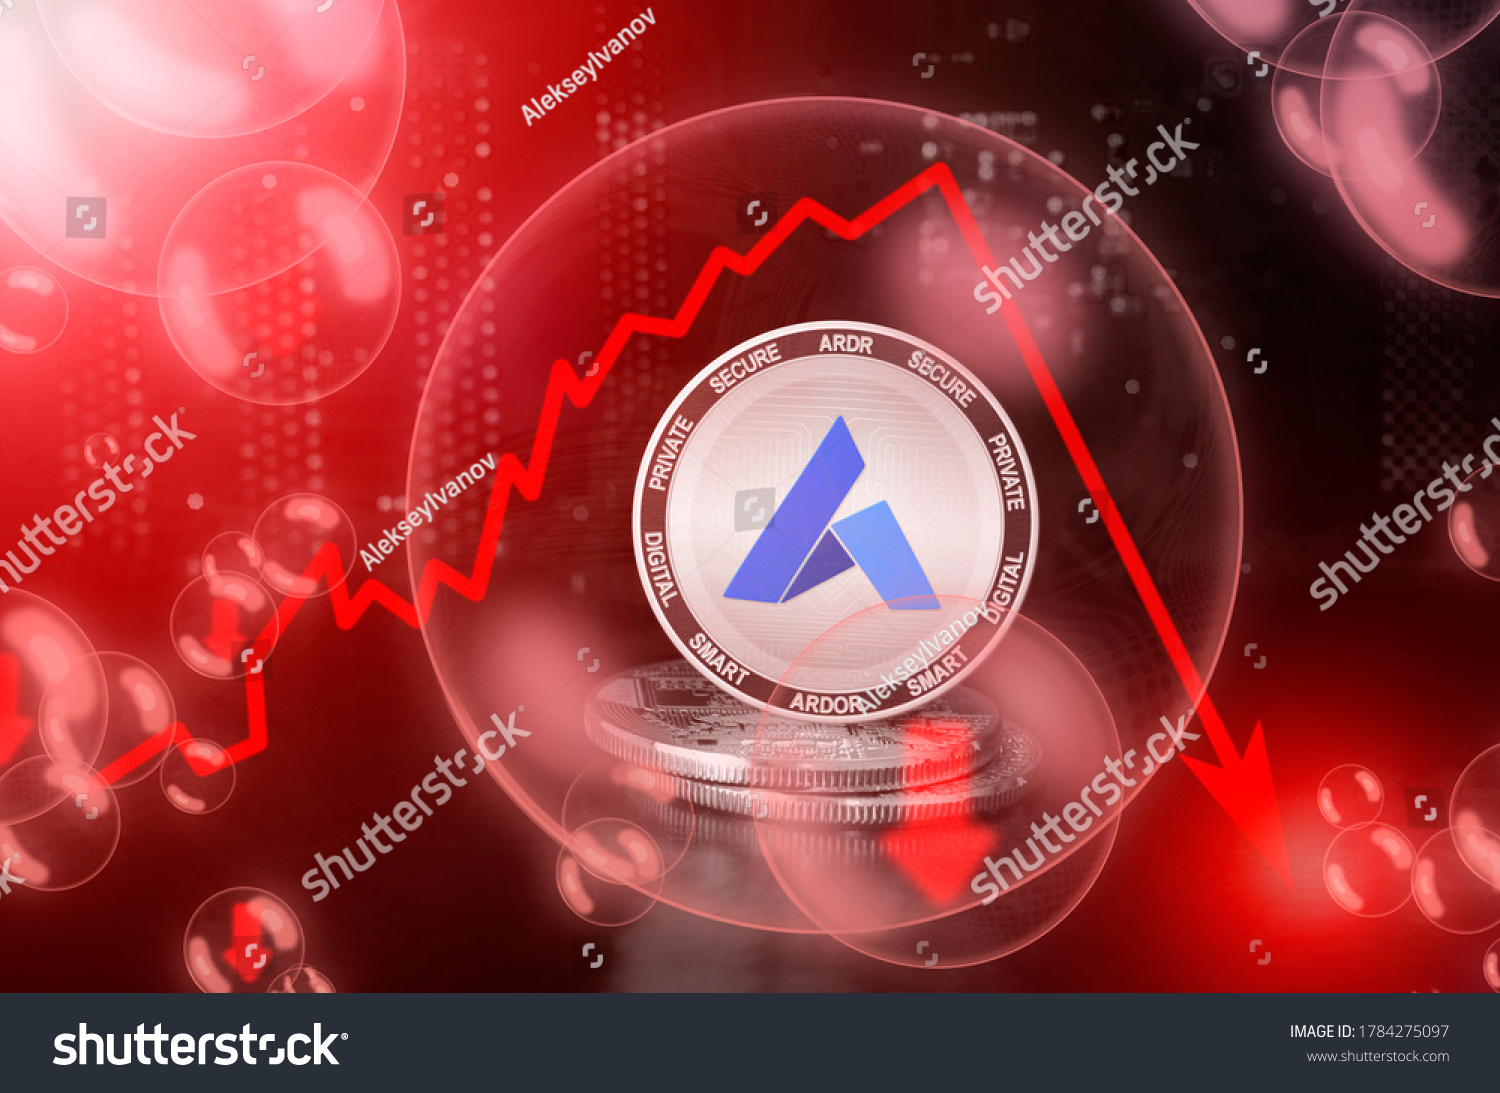 Ardor ARDR coin in a soap bubble. Risks and dangers of investing to Ardor cryptocurrency. Collapse of the exchange rate. Unstable concept. Down drop crash bubble #1784275097